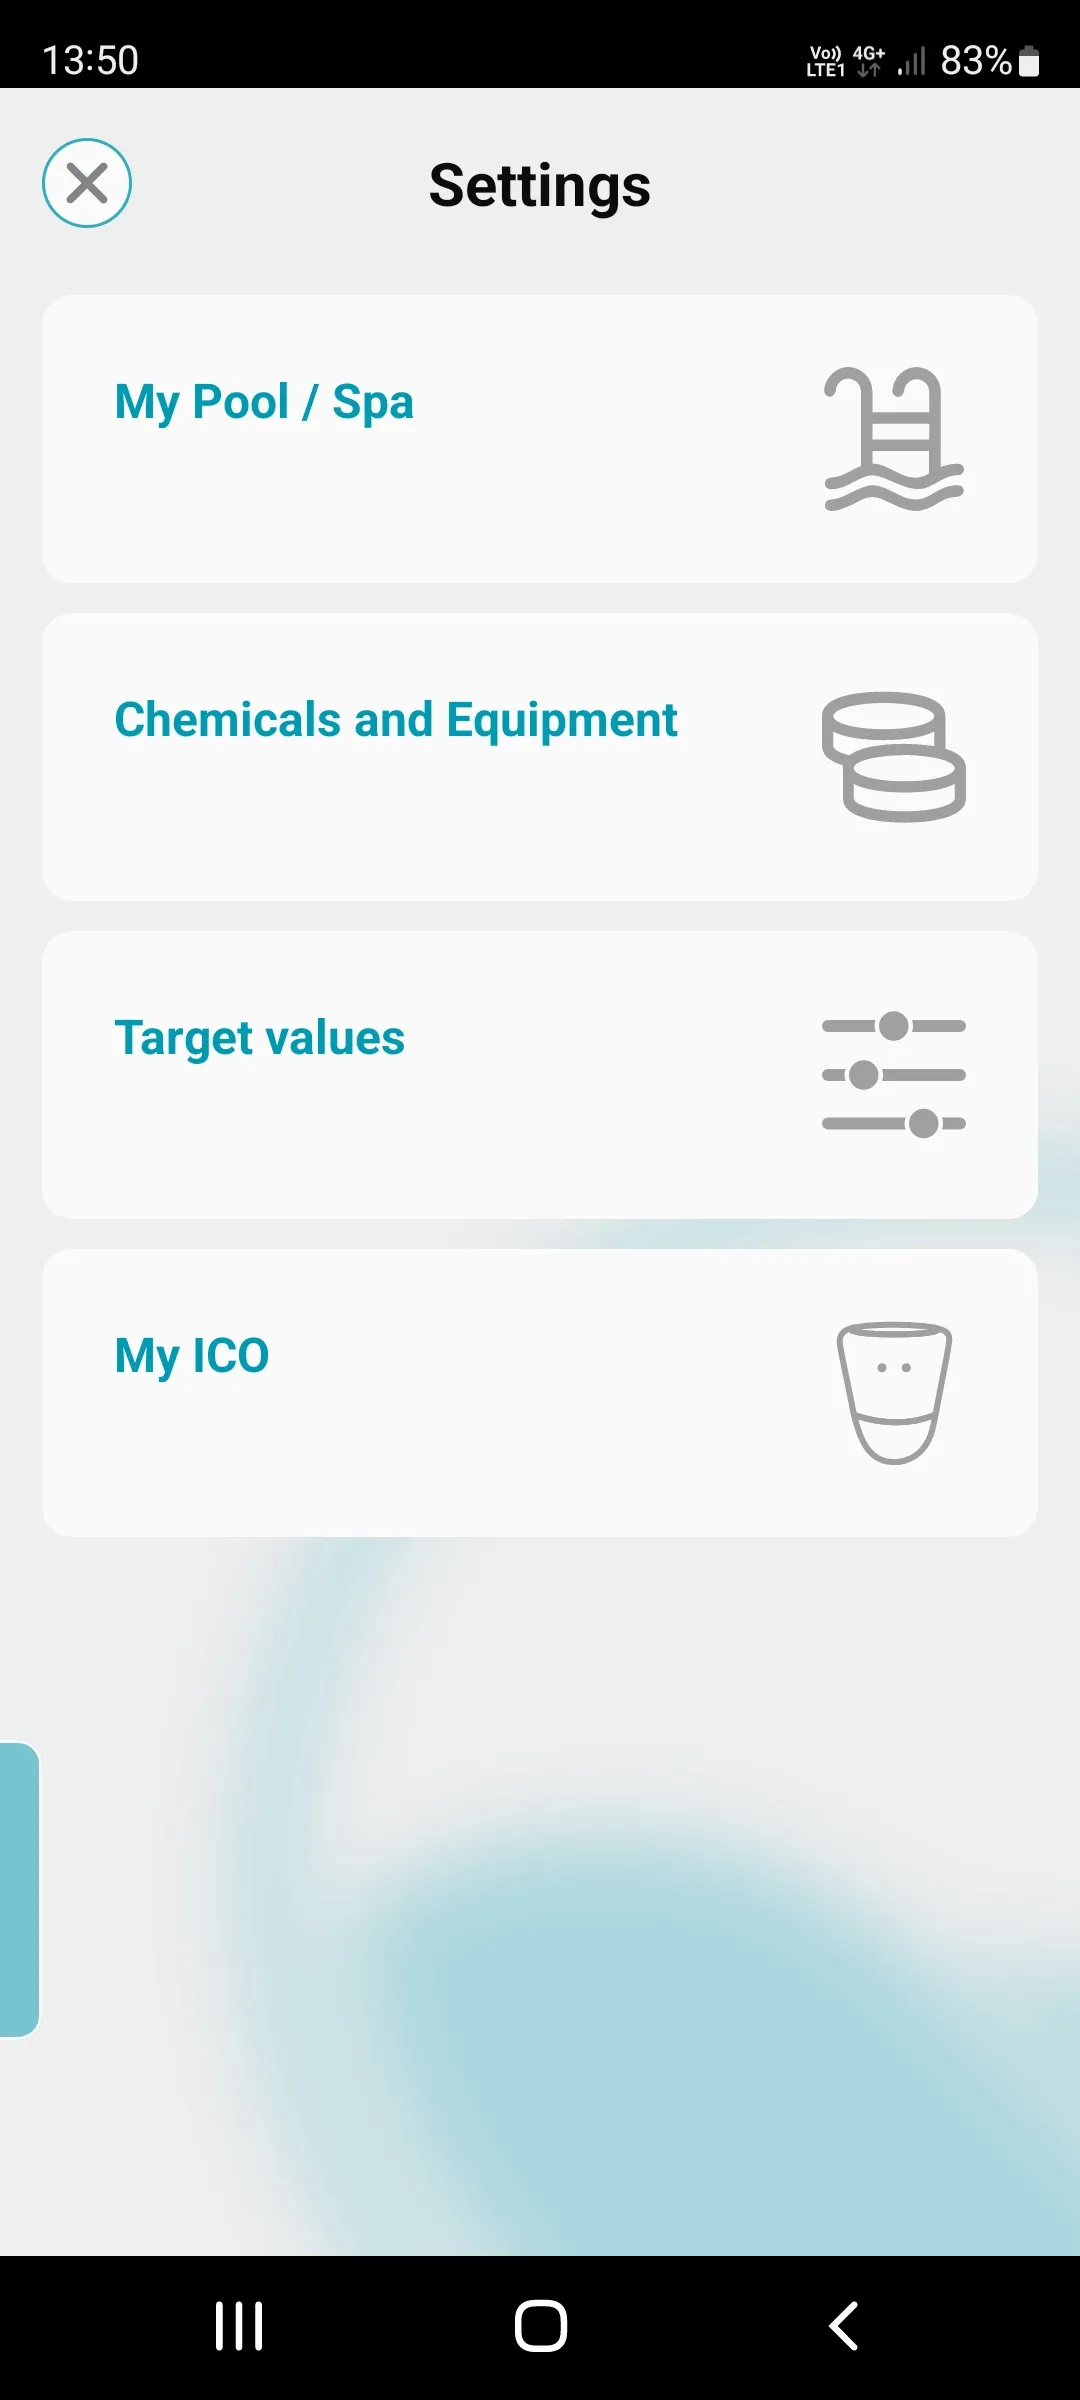 Settings in the ICO application